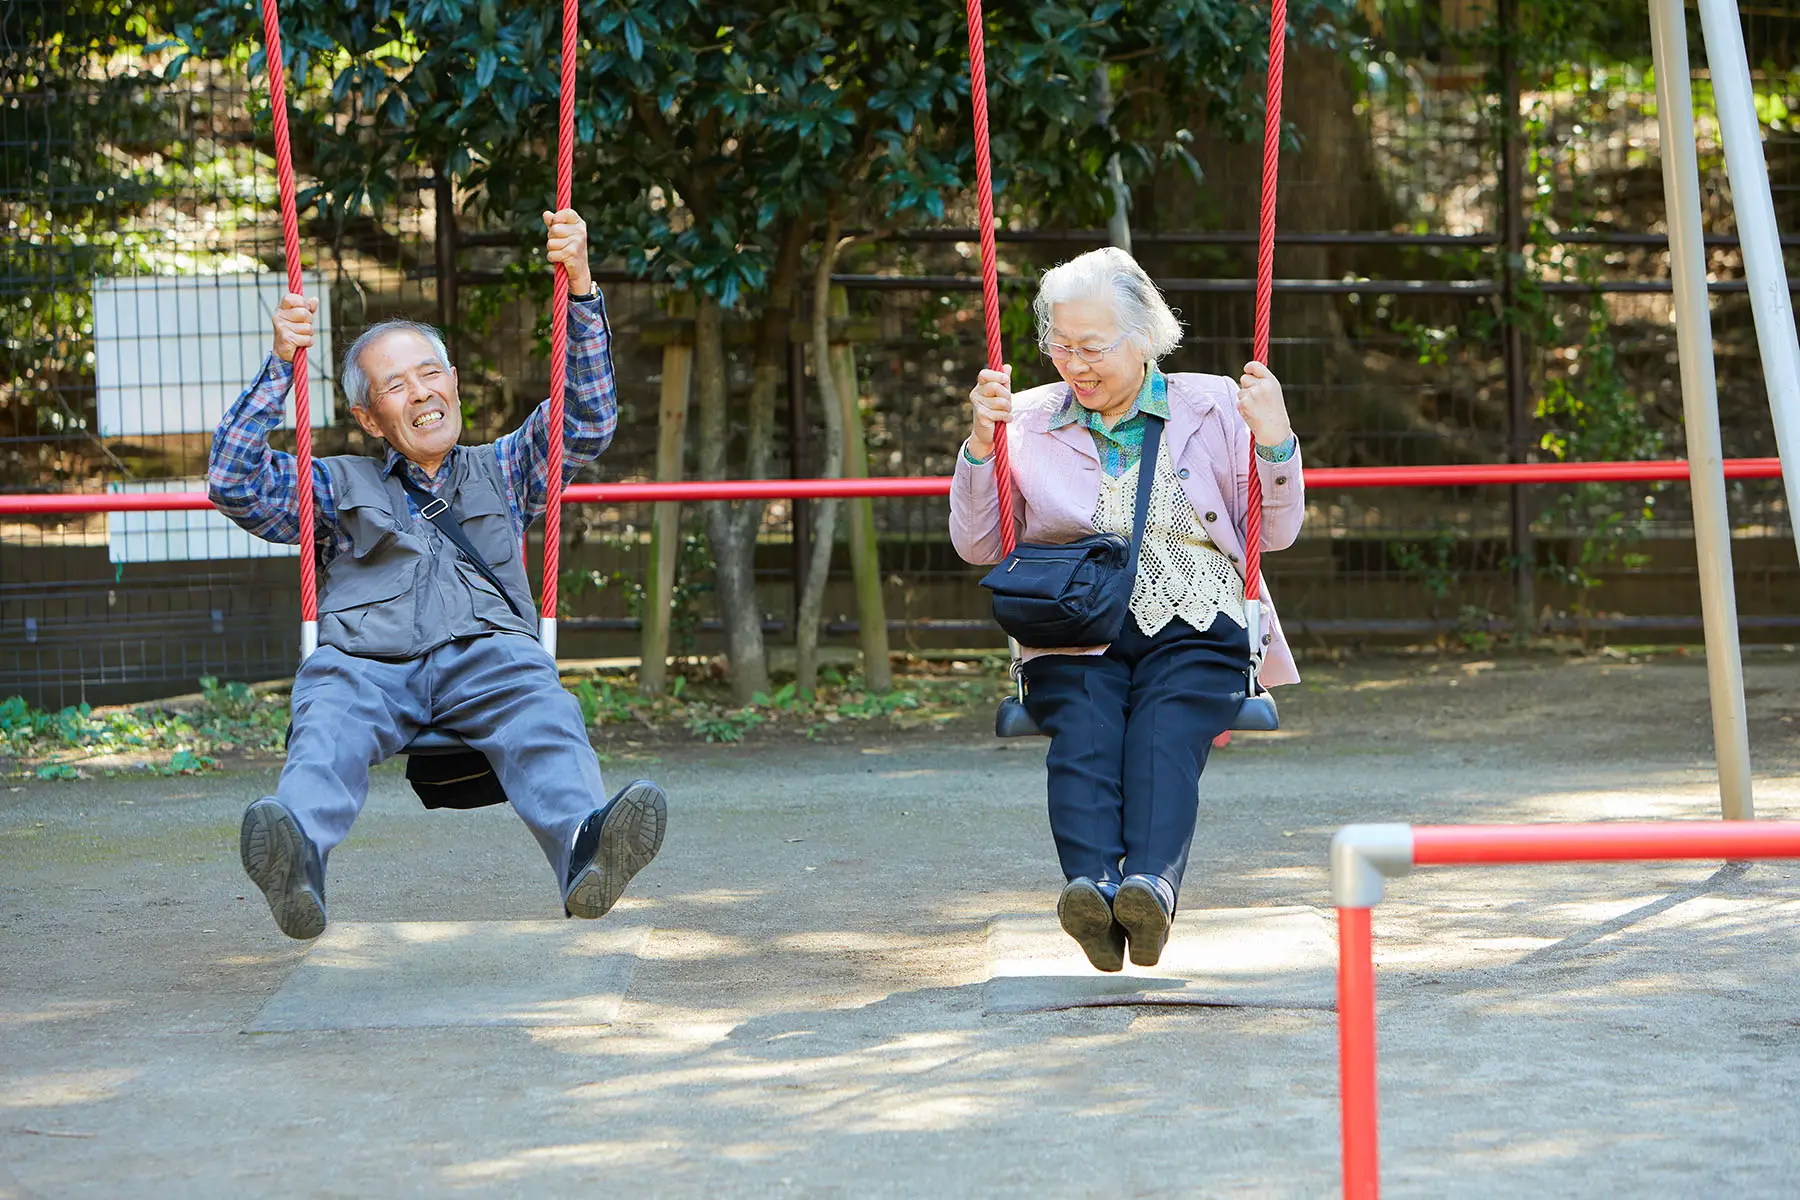 Elderly couple laughing while theyre on a set of swings.